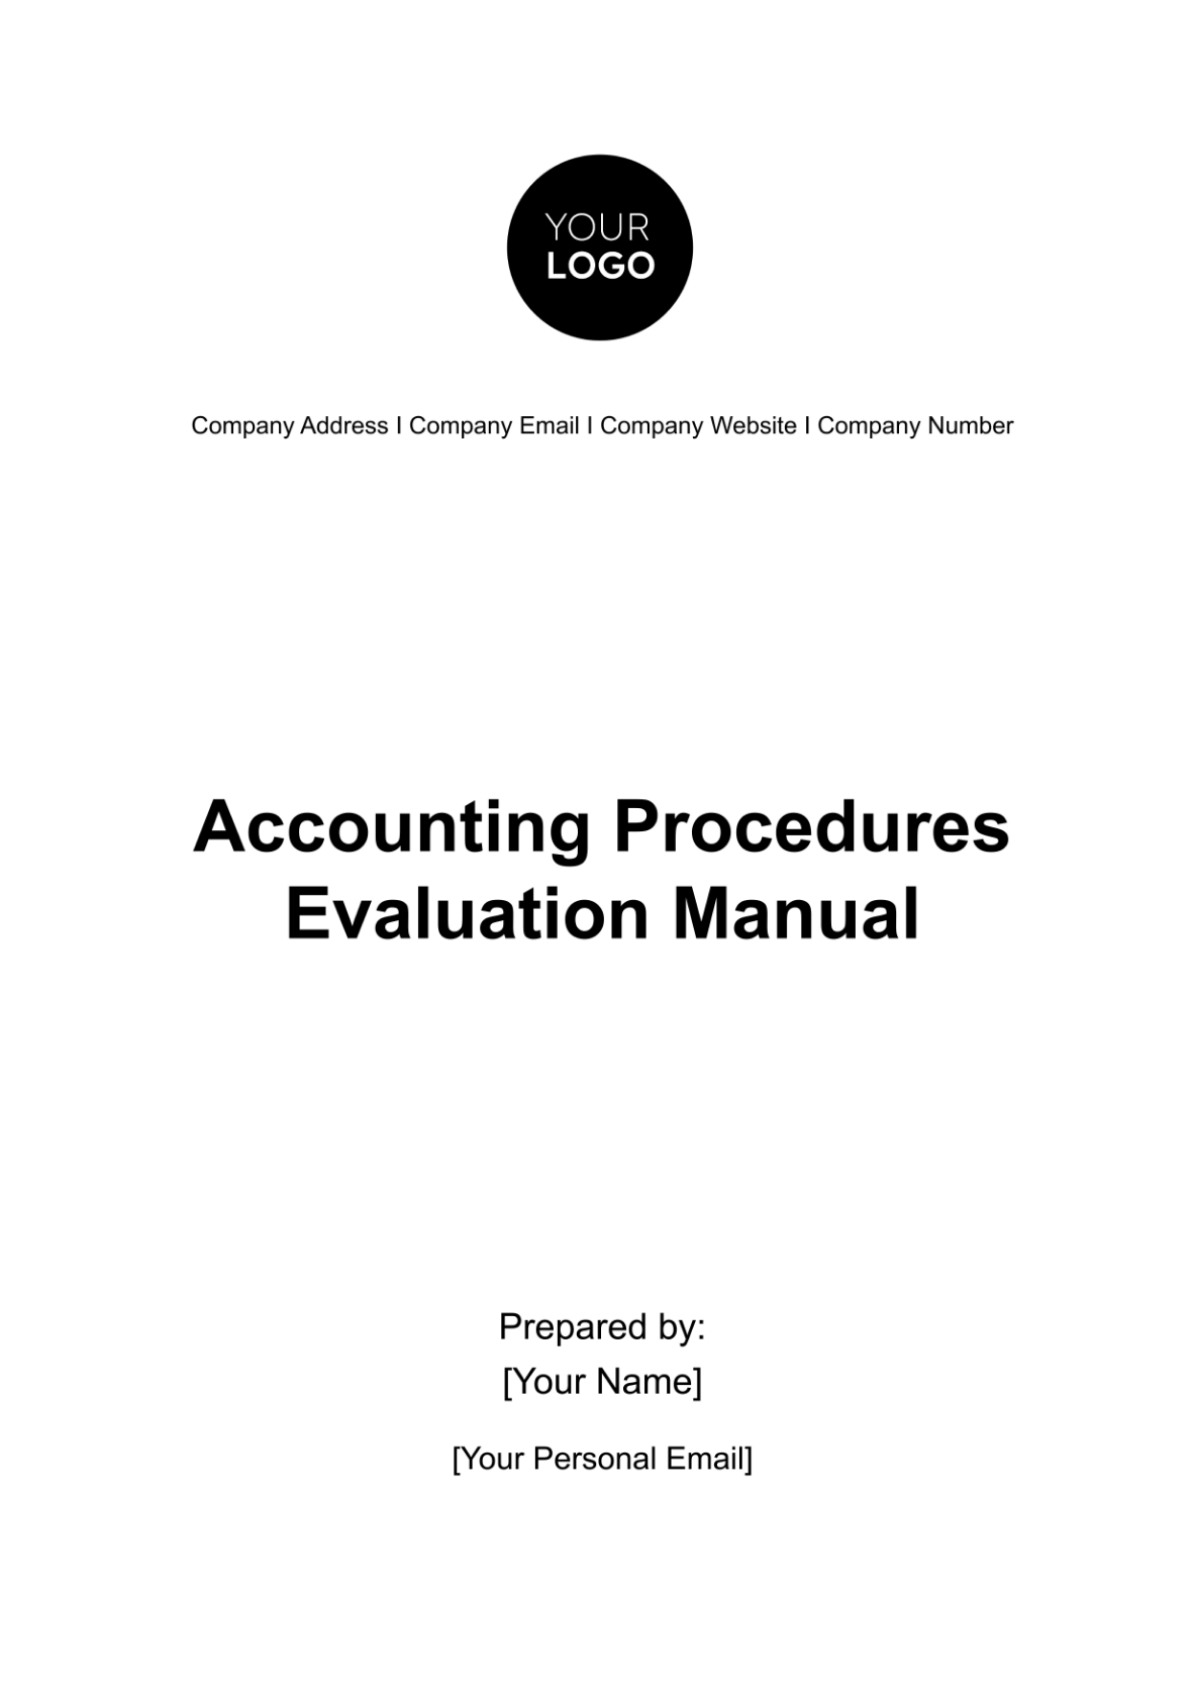 Accounting Procedures Evaluation Manual Template